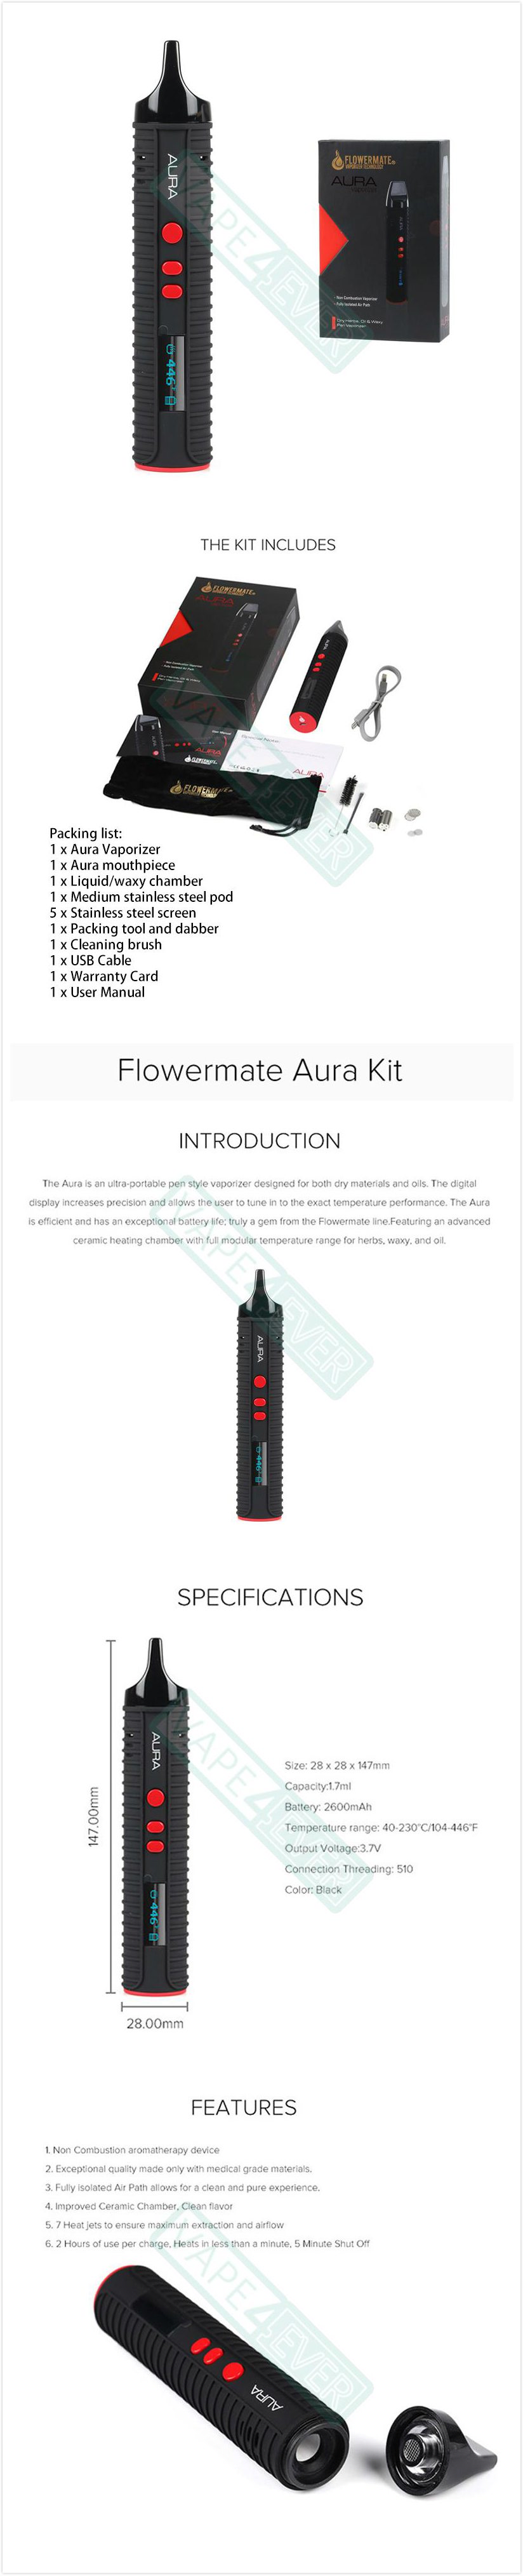 Flowermate AURA Vaporizer Kit 2600mAh With 7 Heat Jets For Dry Herb/Thick Oil Instruction